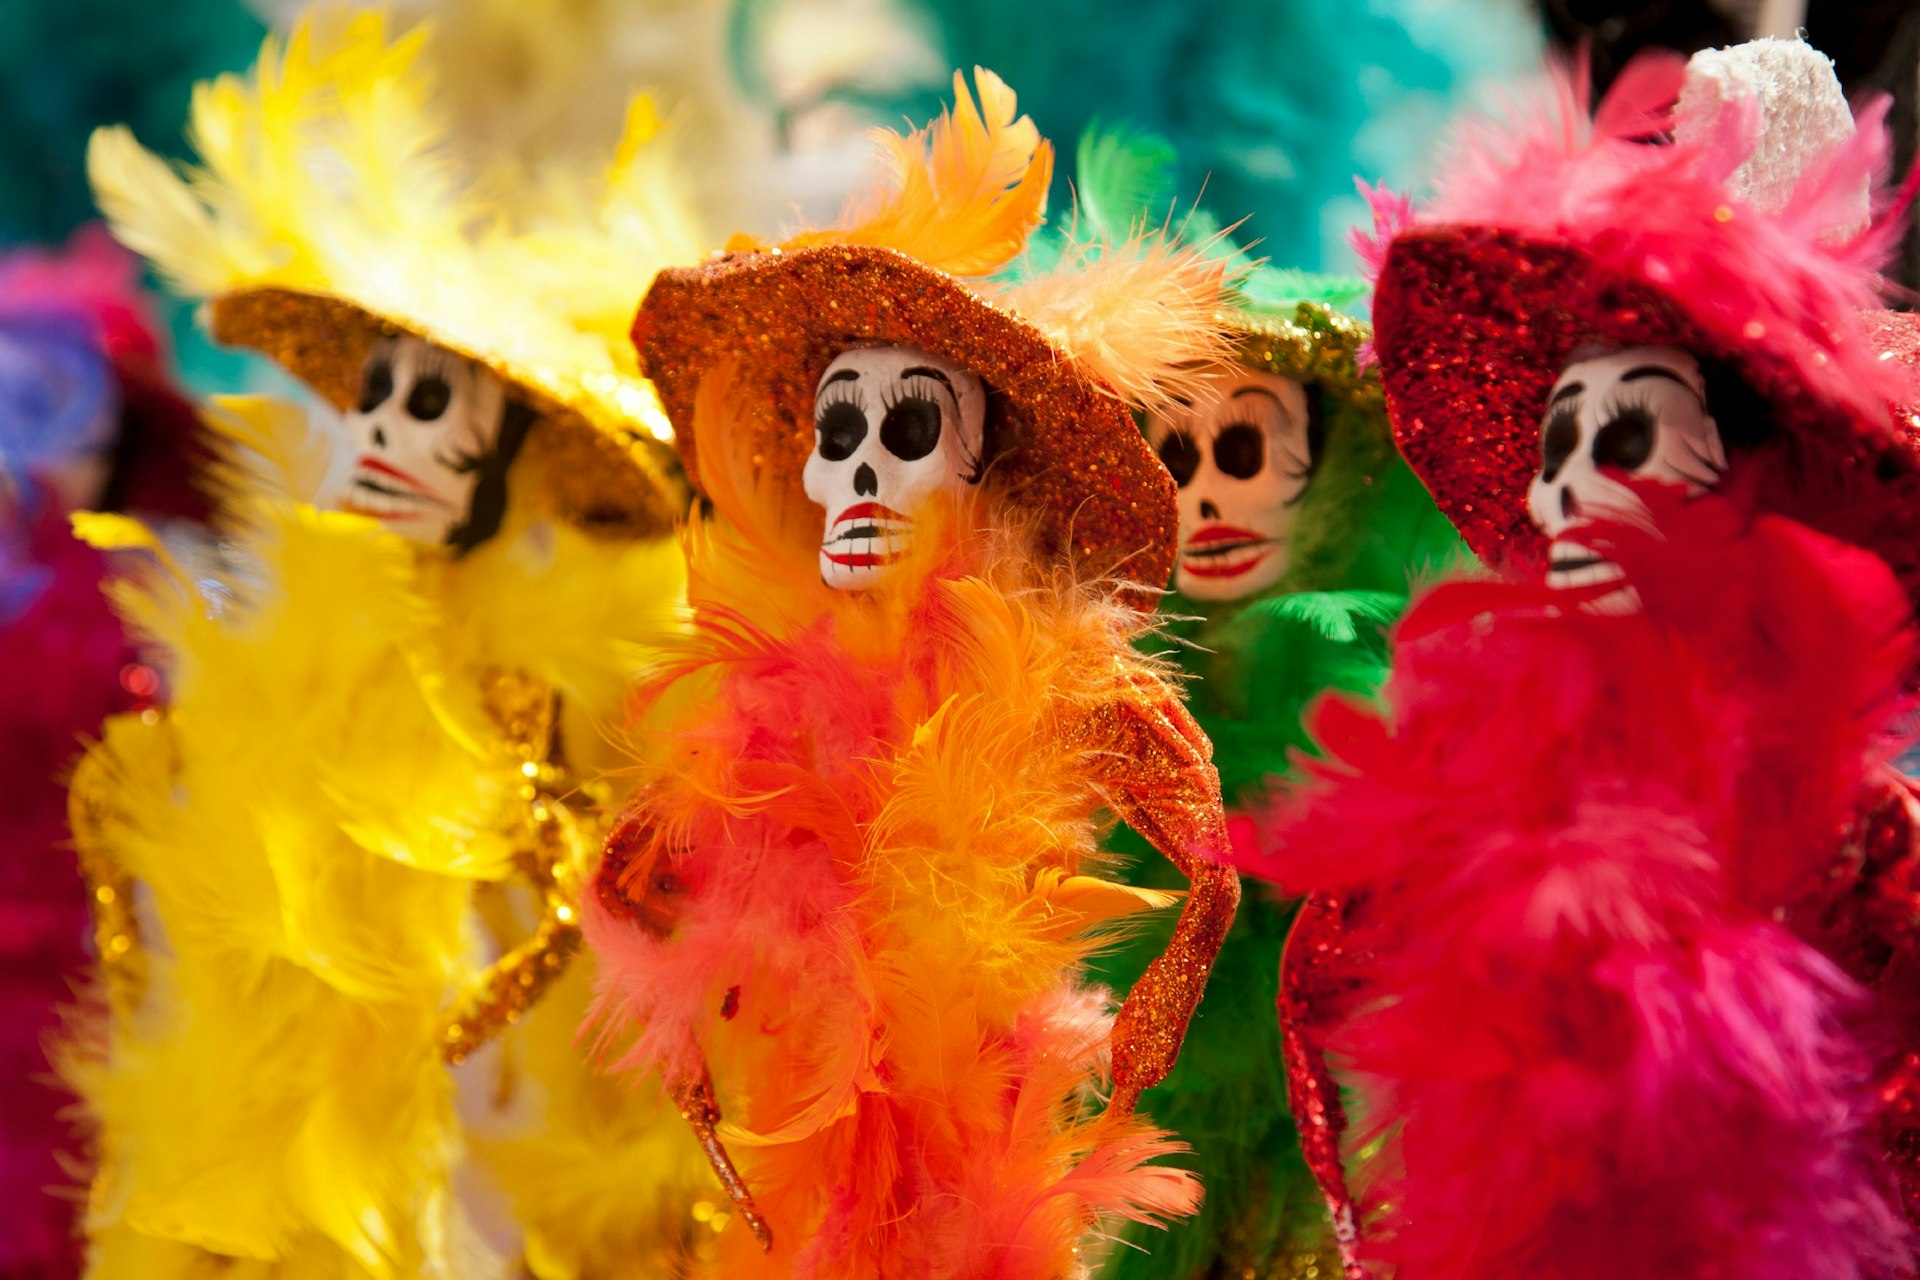 Skeleton dolls in colorful outfits mark the Day of the Dead